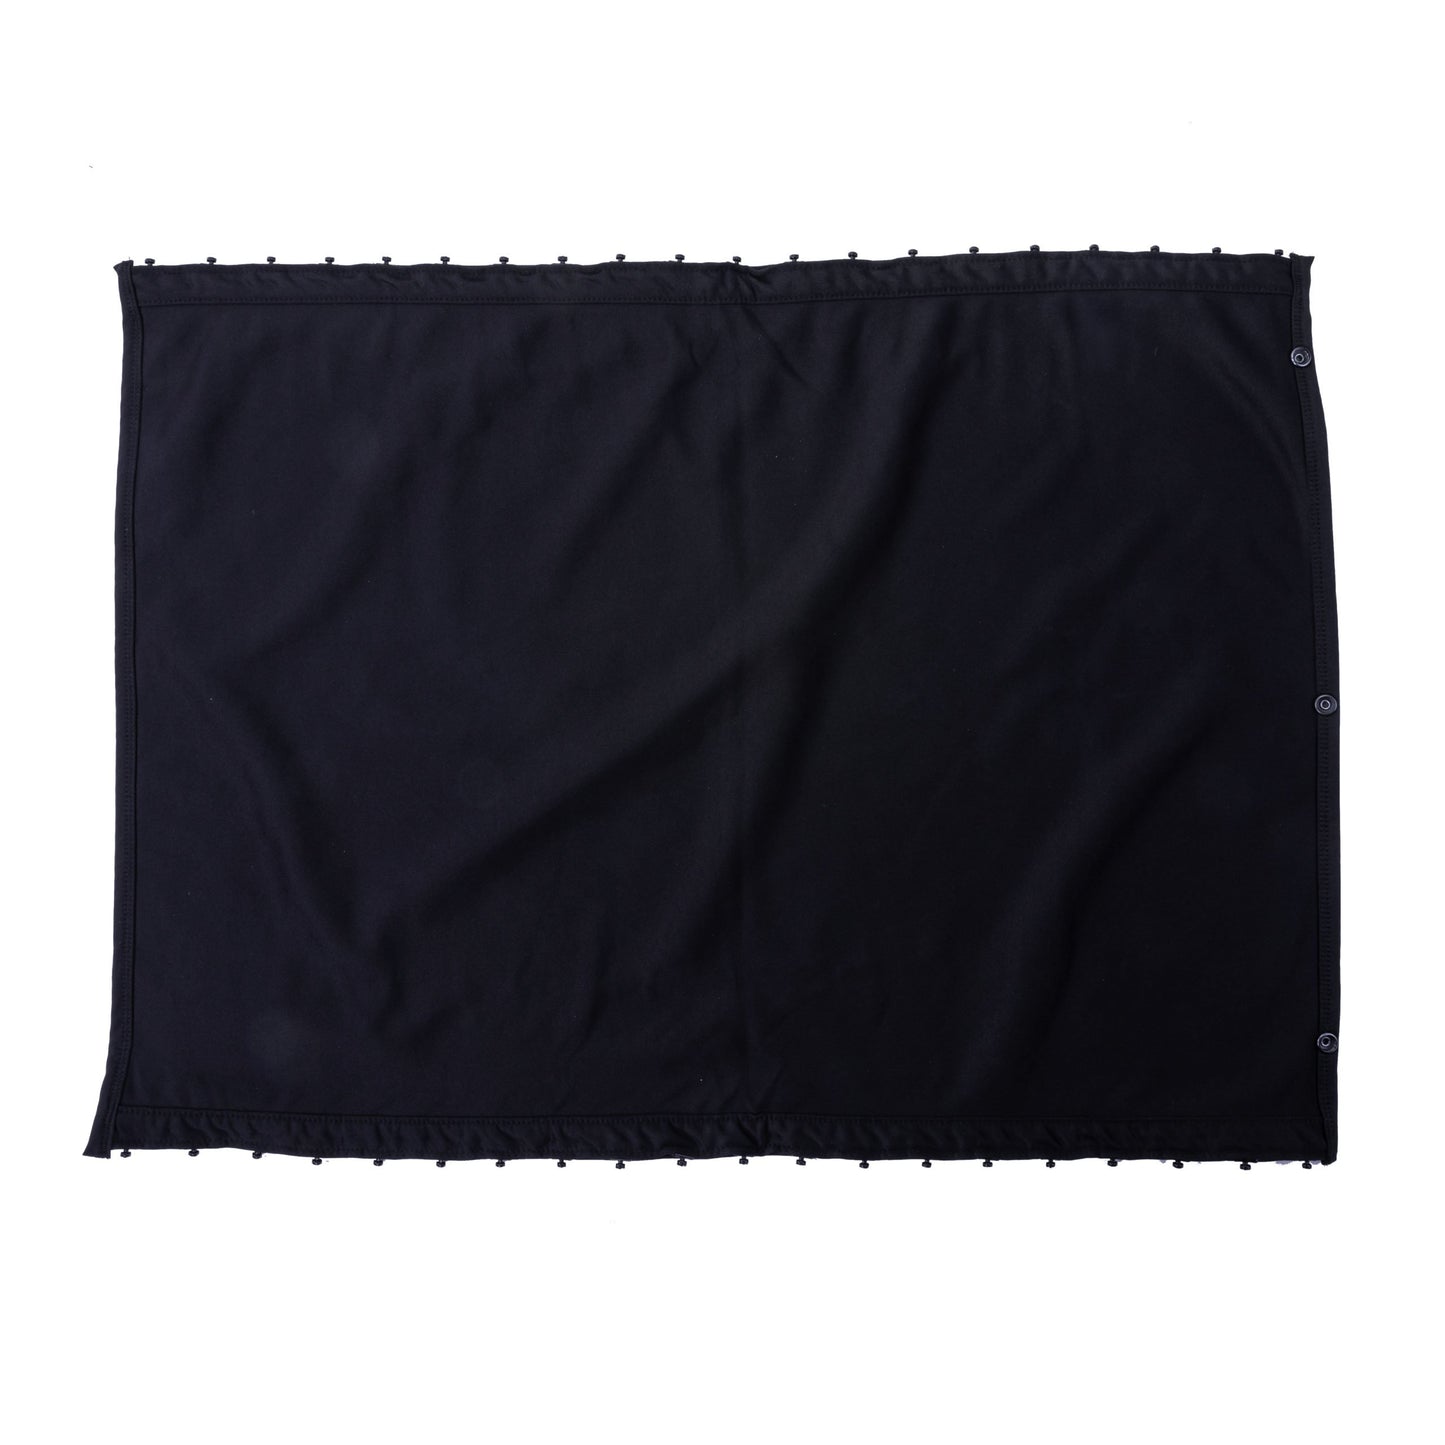 Premium Black-out Curtain Material 60cm For camper conversions Spares for Van-X Curtain kits